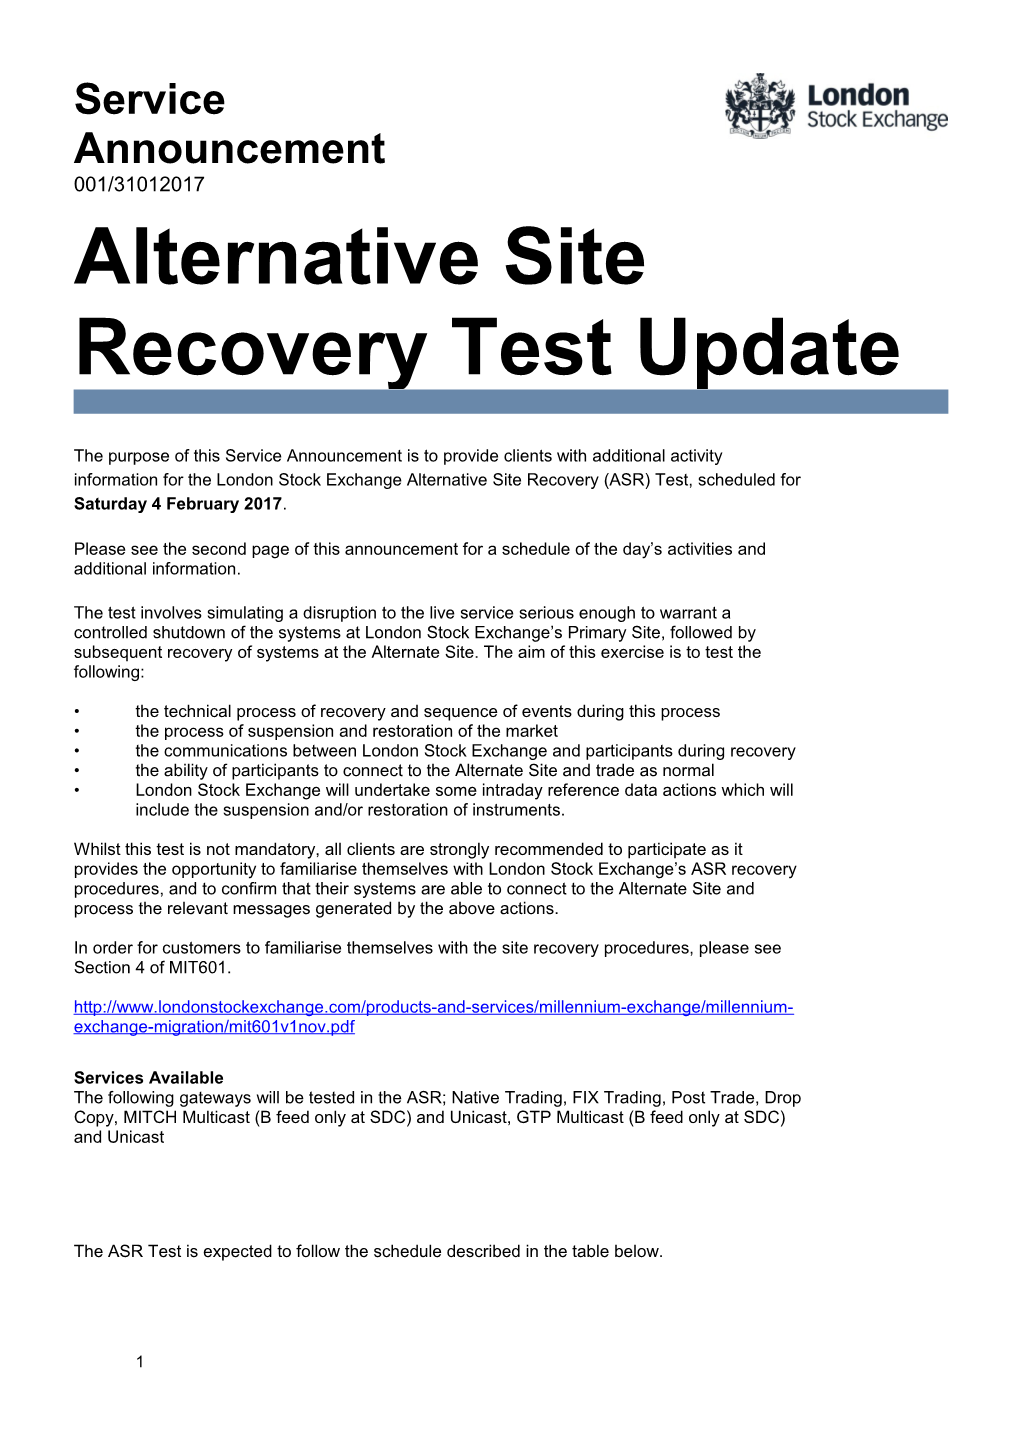 Alternate Site Recovery Test